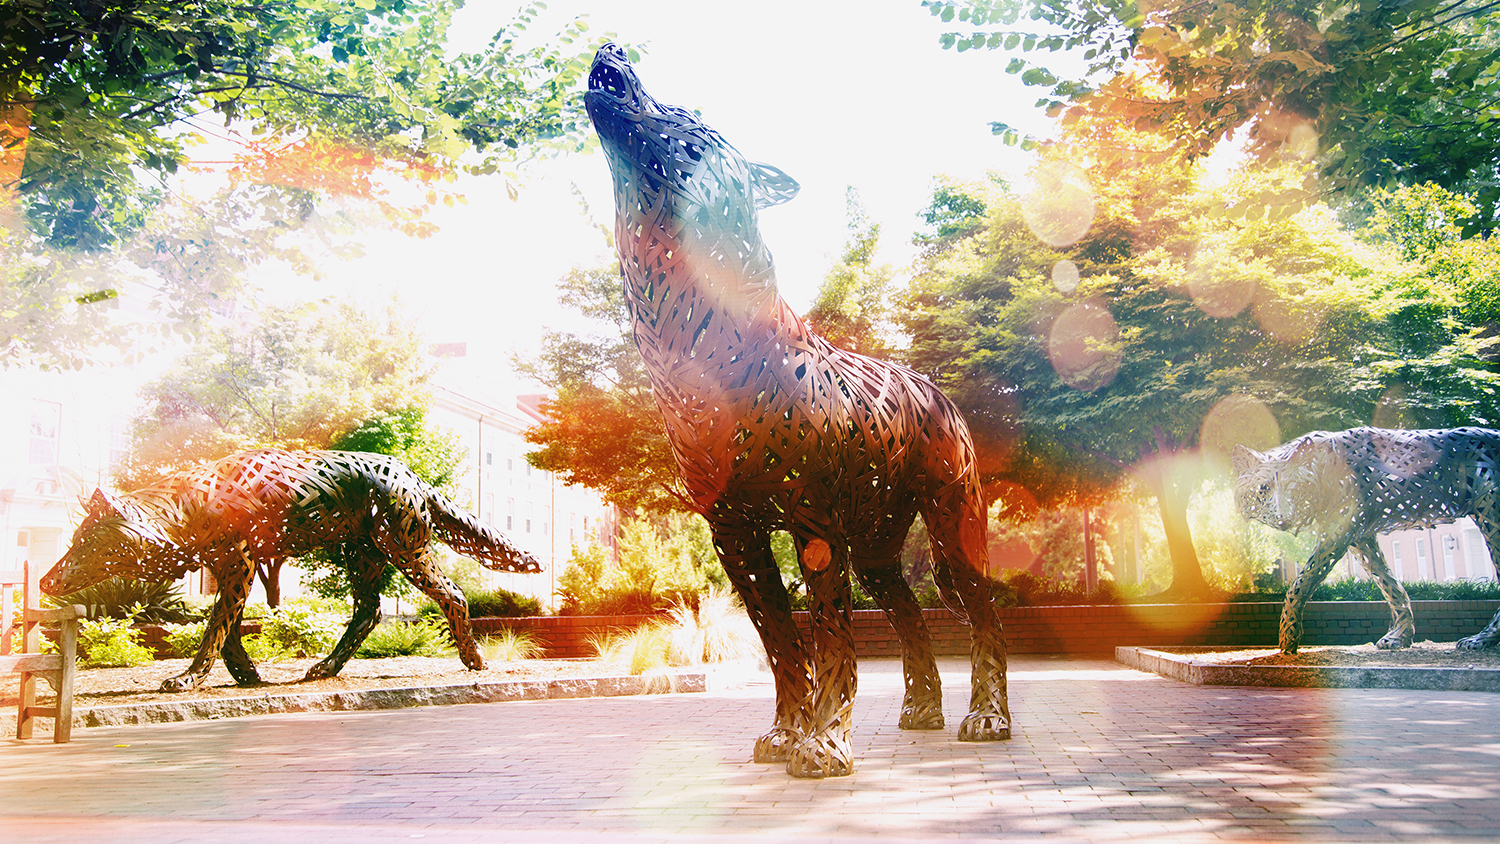 Copper wolves on central campus.